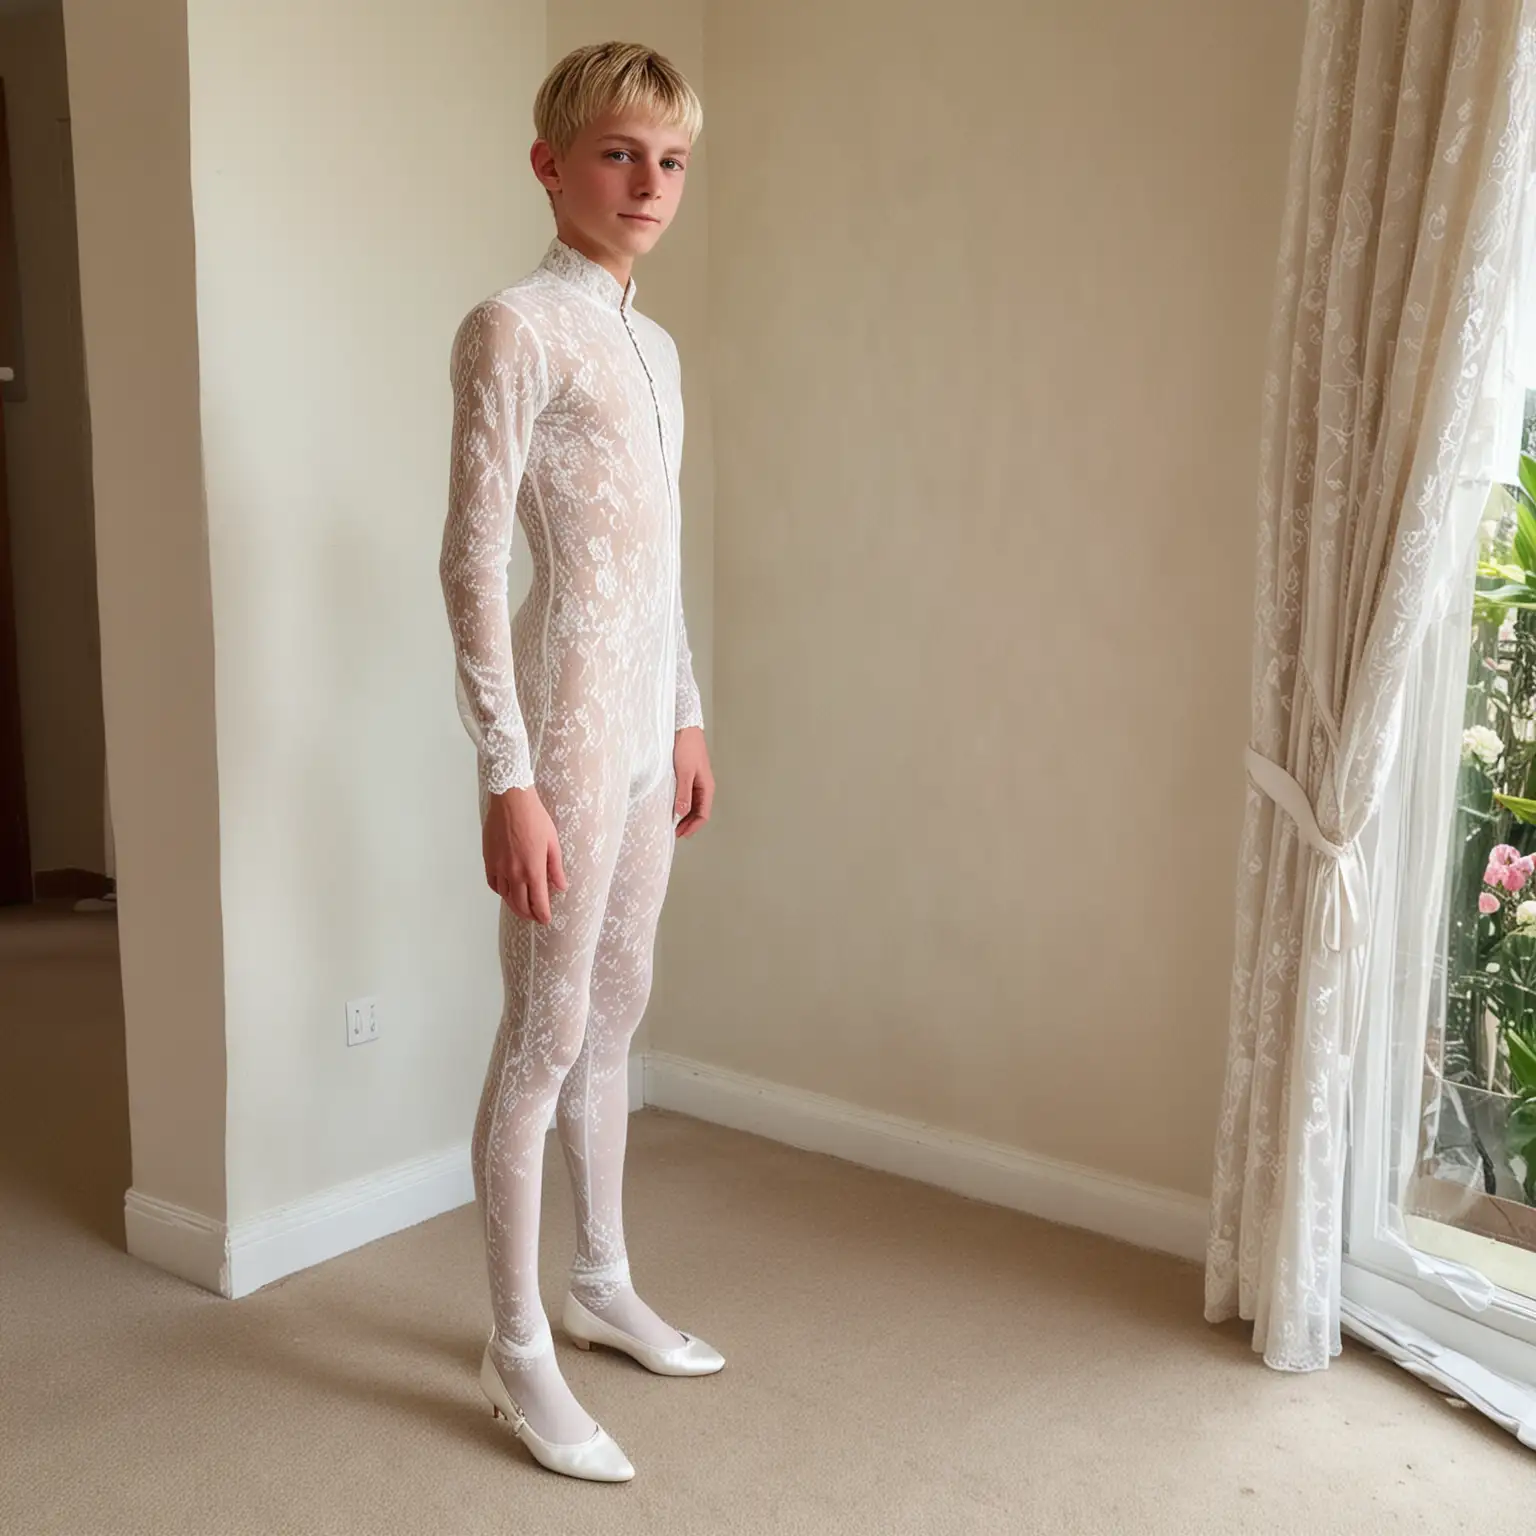 very, very, thin 16 year old blond boy in skin-tight white lace catsuit at wedding. White knee-length ballet shoes. he has 35cm waist. no collar